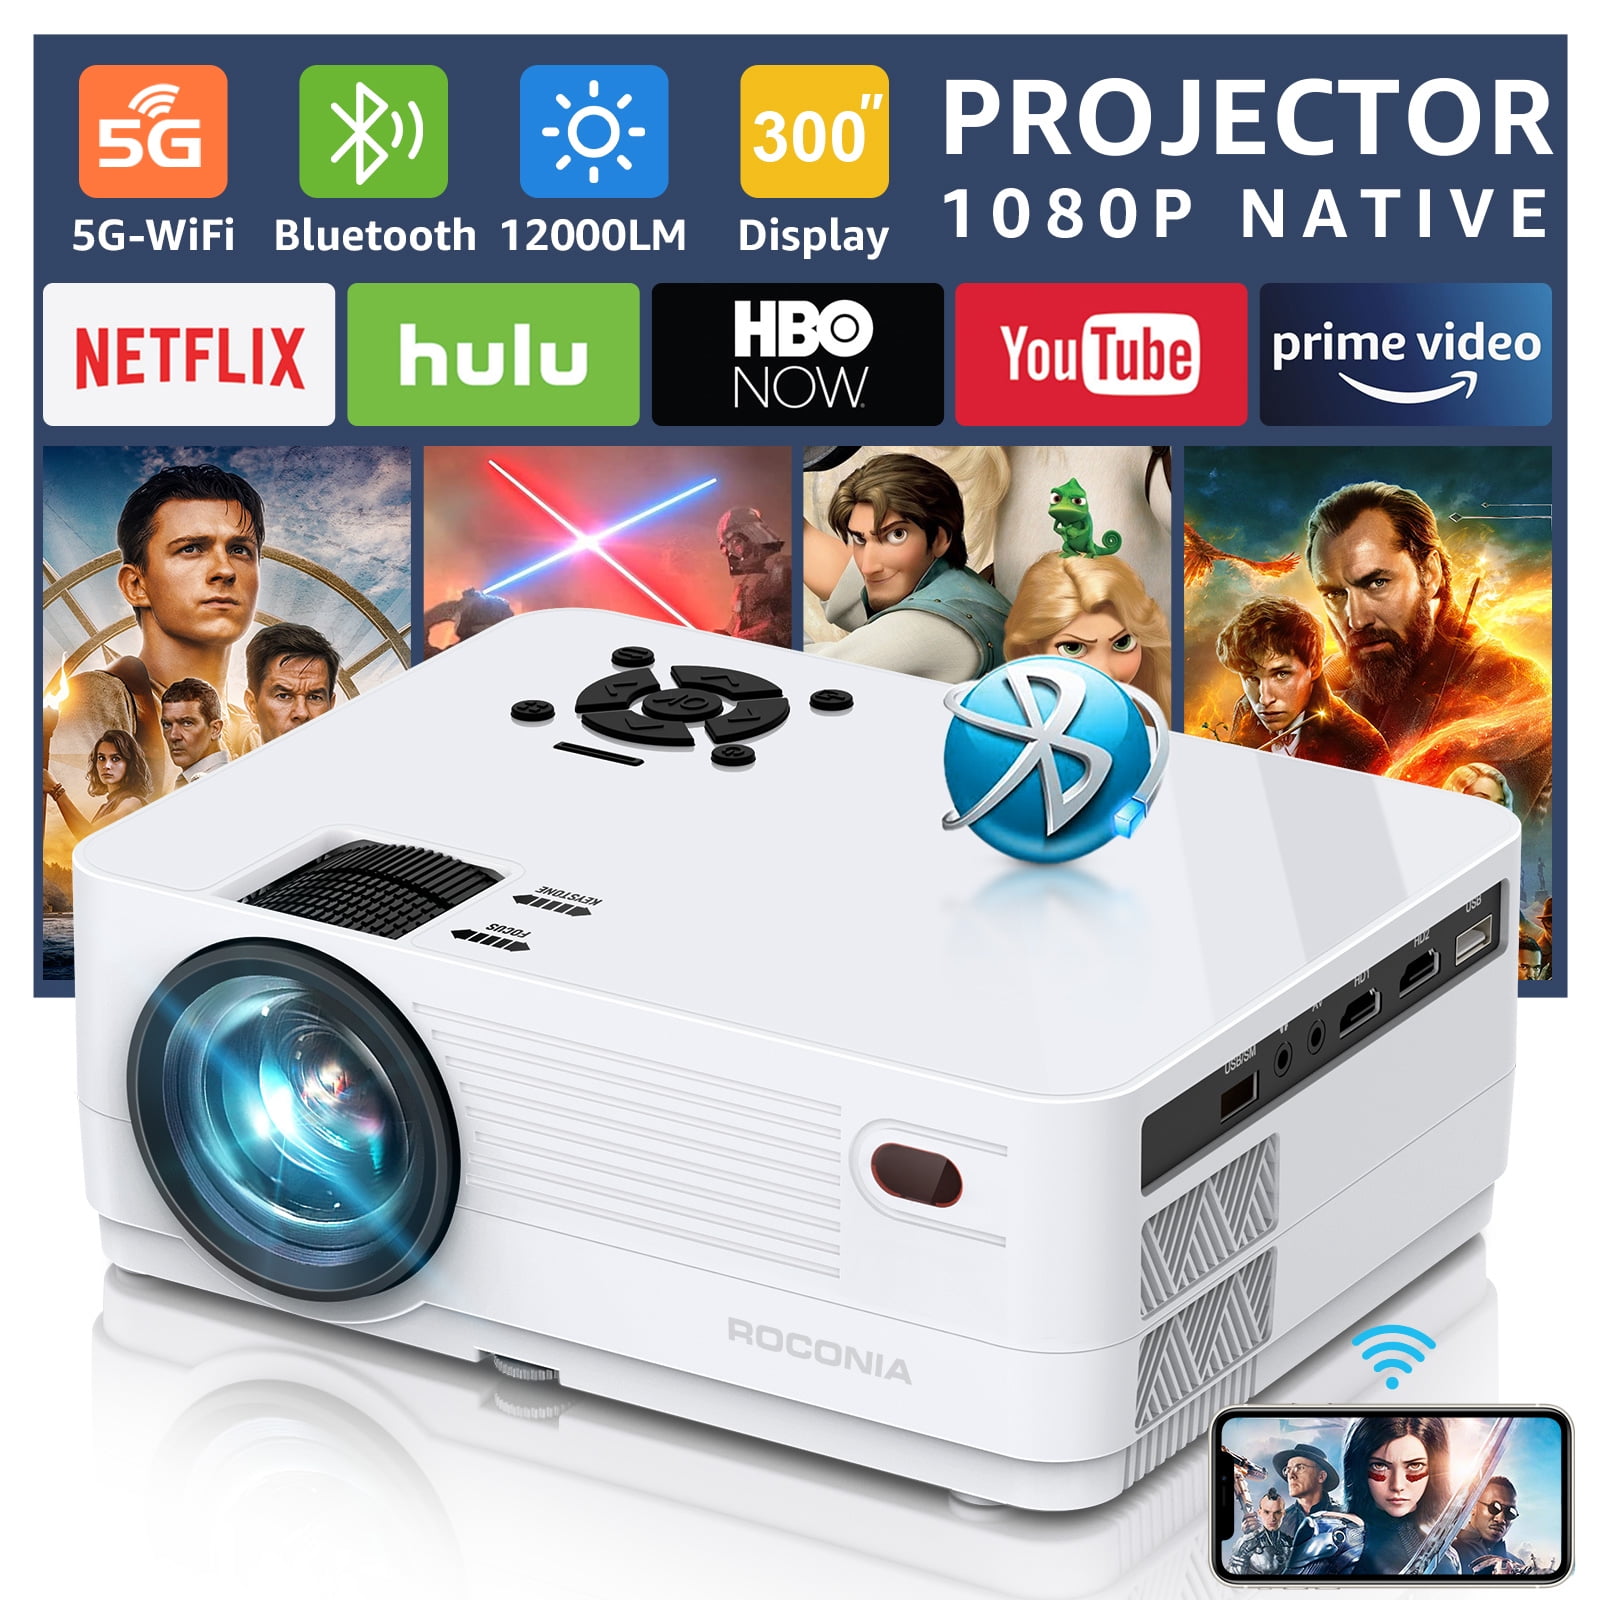 Movie Projector, Wireless HD 1080p Outdoor Bluetooth Projector LED Mini Portable WiFi Projector for Smartphone, with Airplay, Speaker, HDMI, USB Suppo - 3